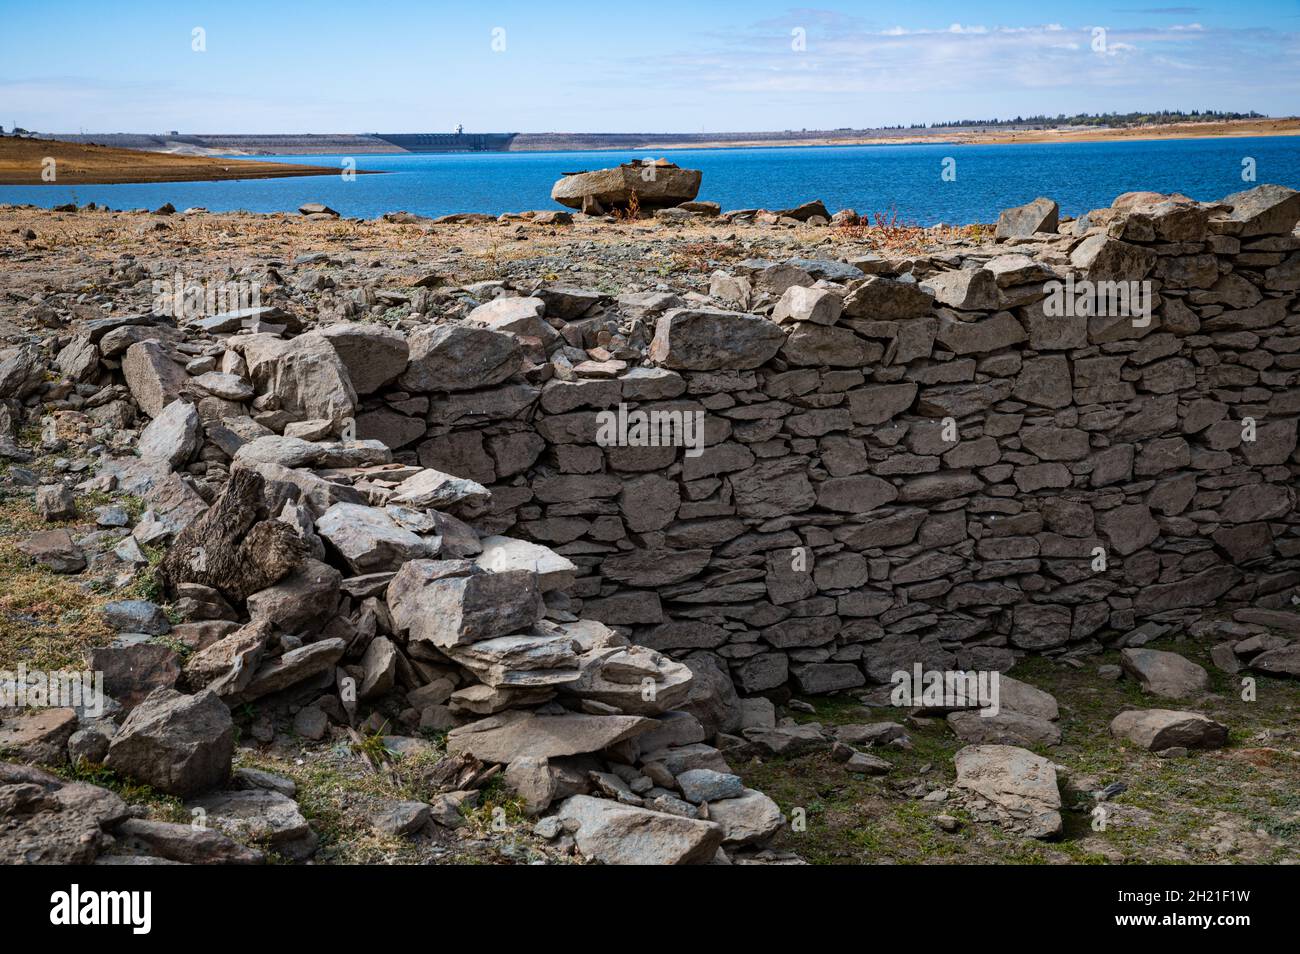 Remnants of a rock wall in the pioneer town of Red Bank, California. Ruins from the town were uncovered in Folsom Lake due the state's current drought. Stock Photo